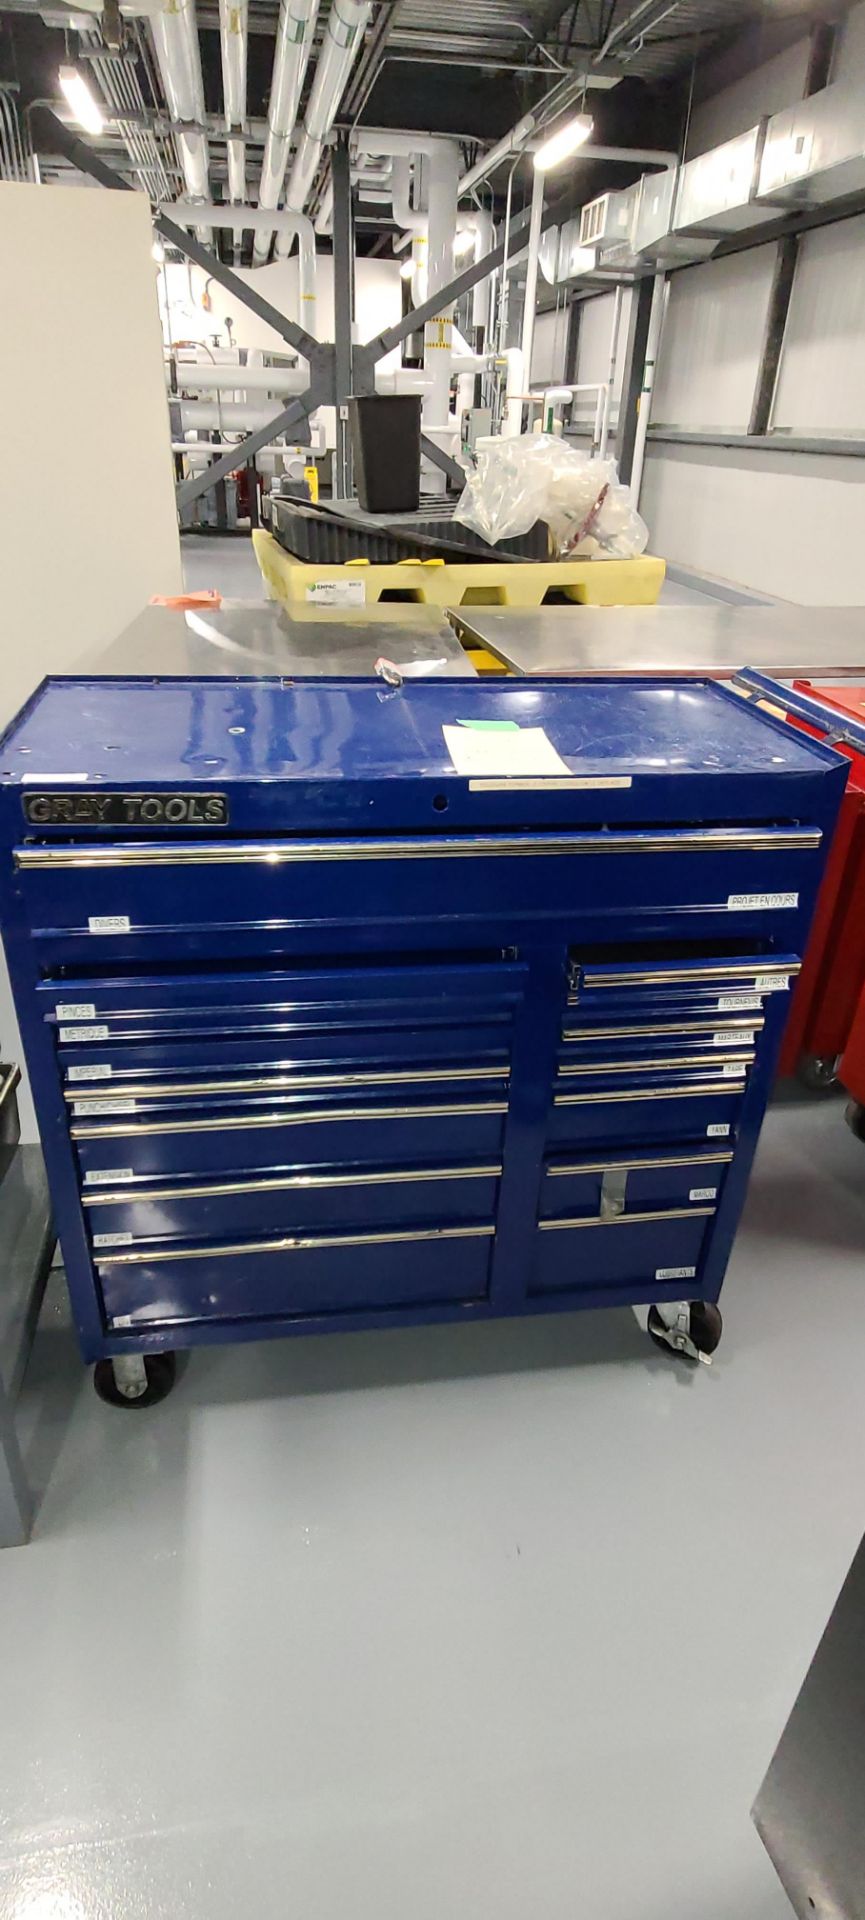 Gray Tools Rolling Tool Chest